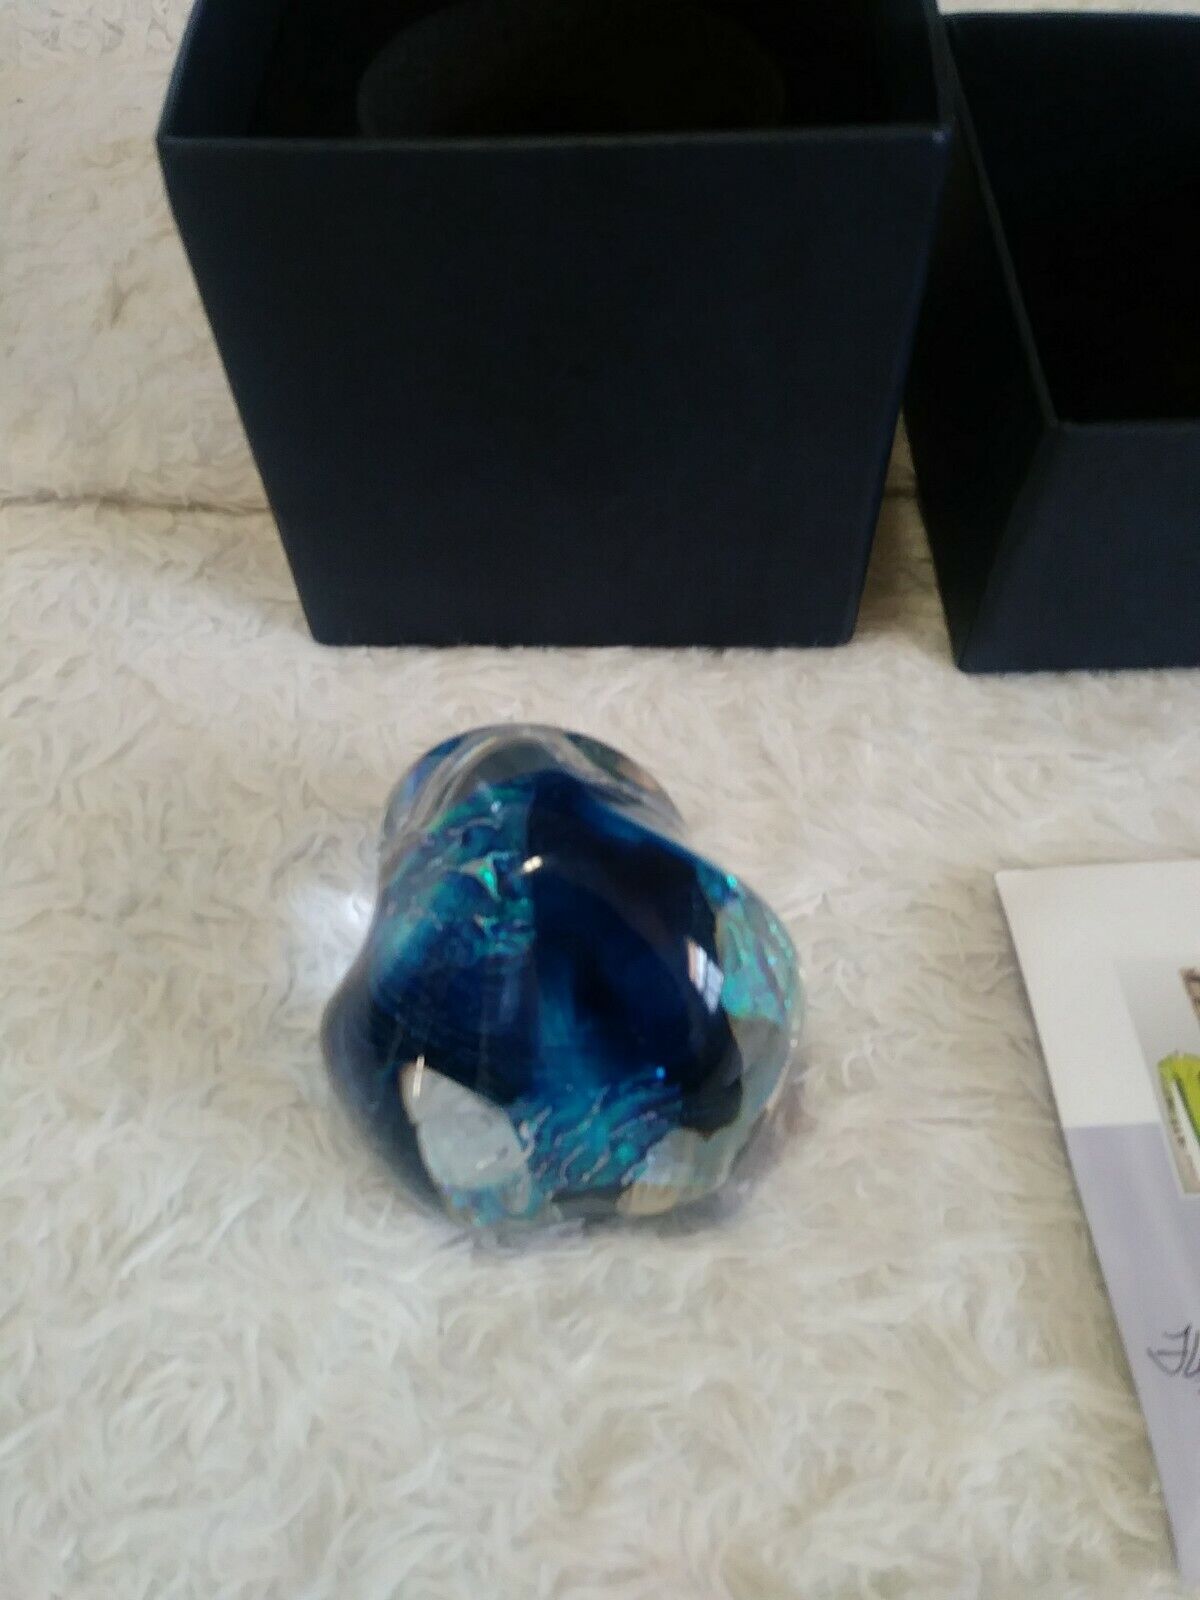 Rare Medium Signed Correia 2013 Art Glass Paperweight Abstract Turquoise.